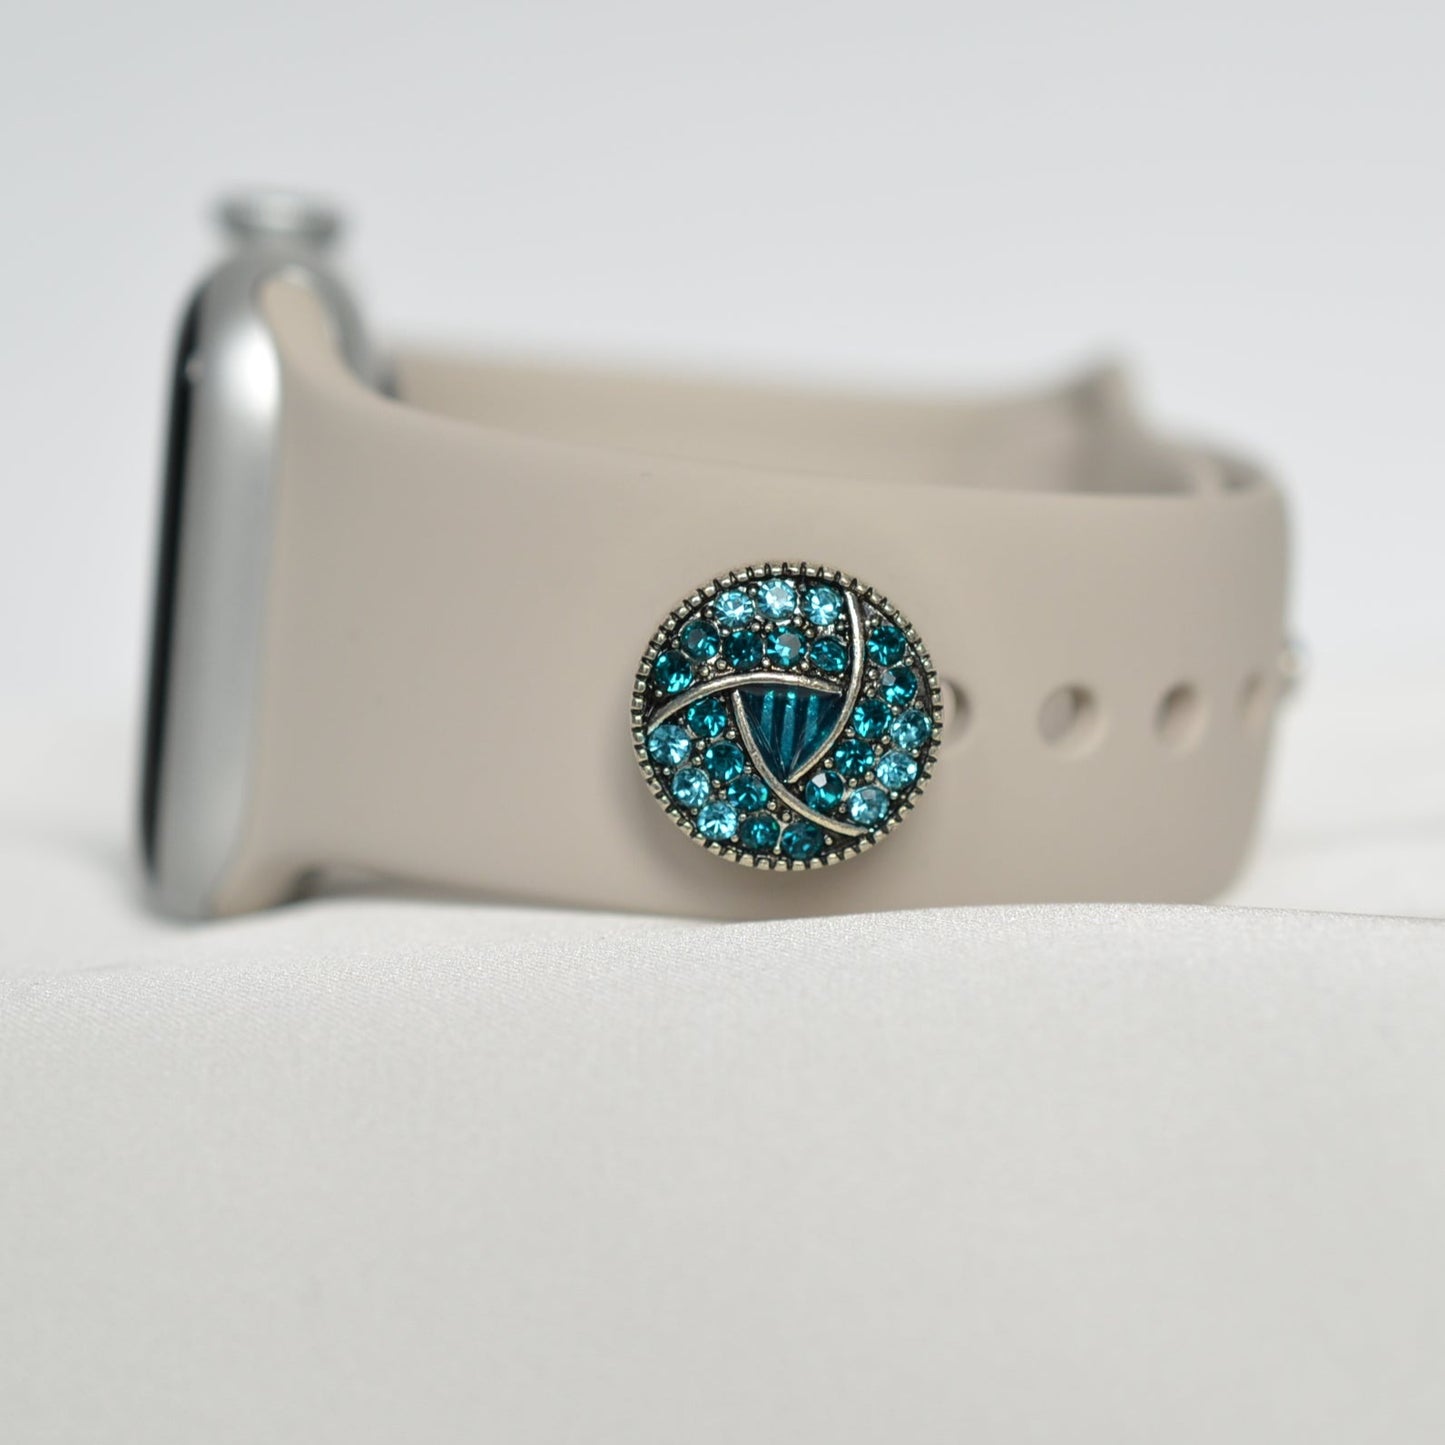 Turquoise and Blue Charm for Belt, Bag and Watch Bands